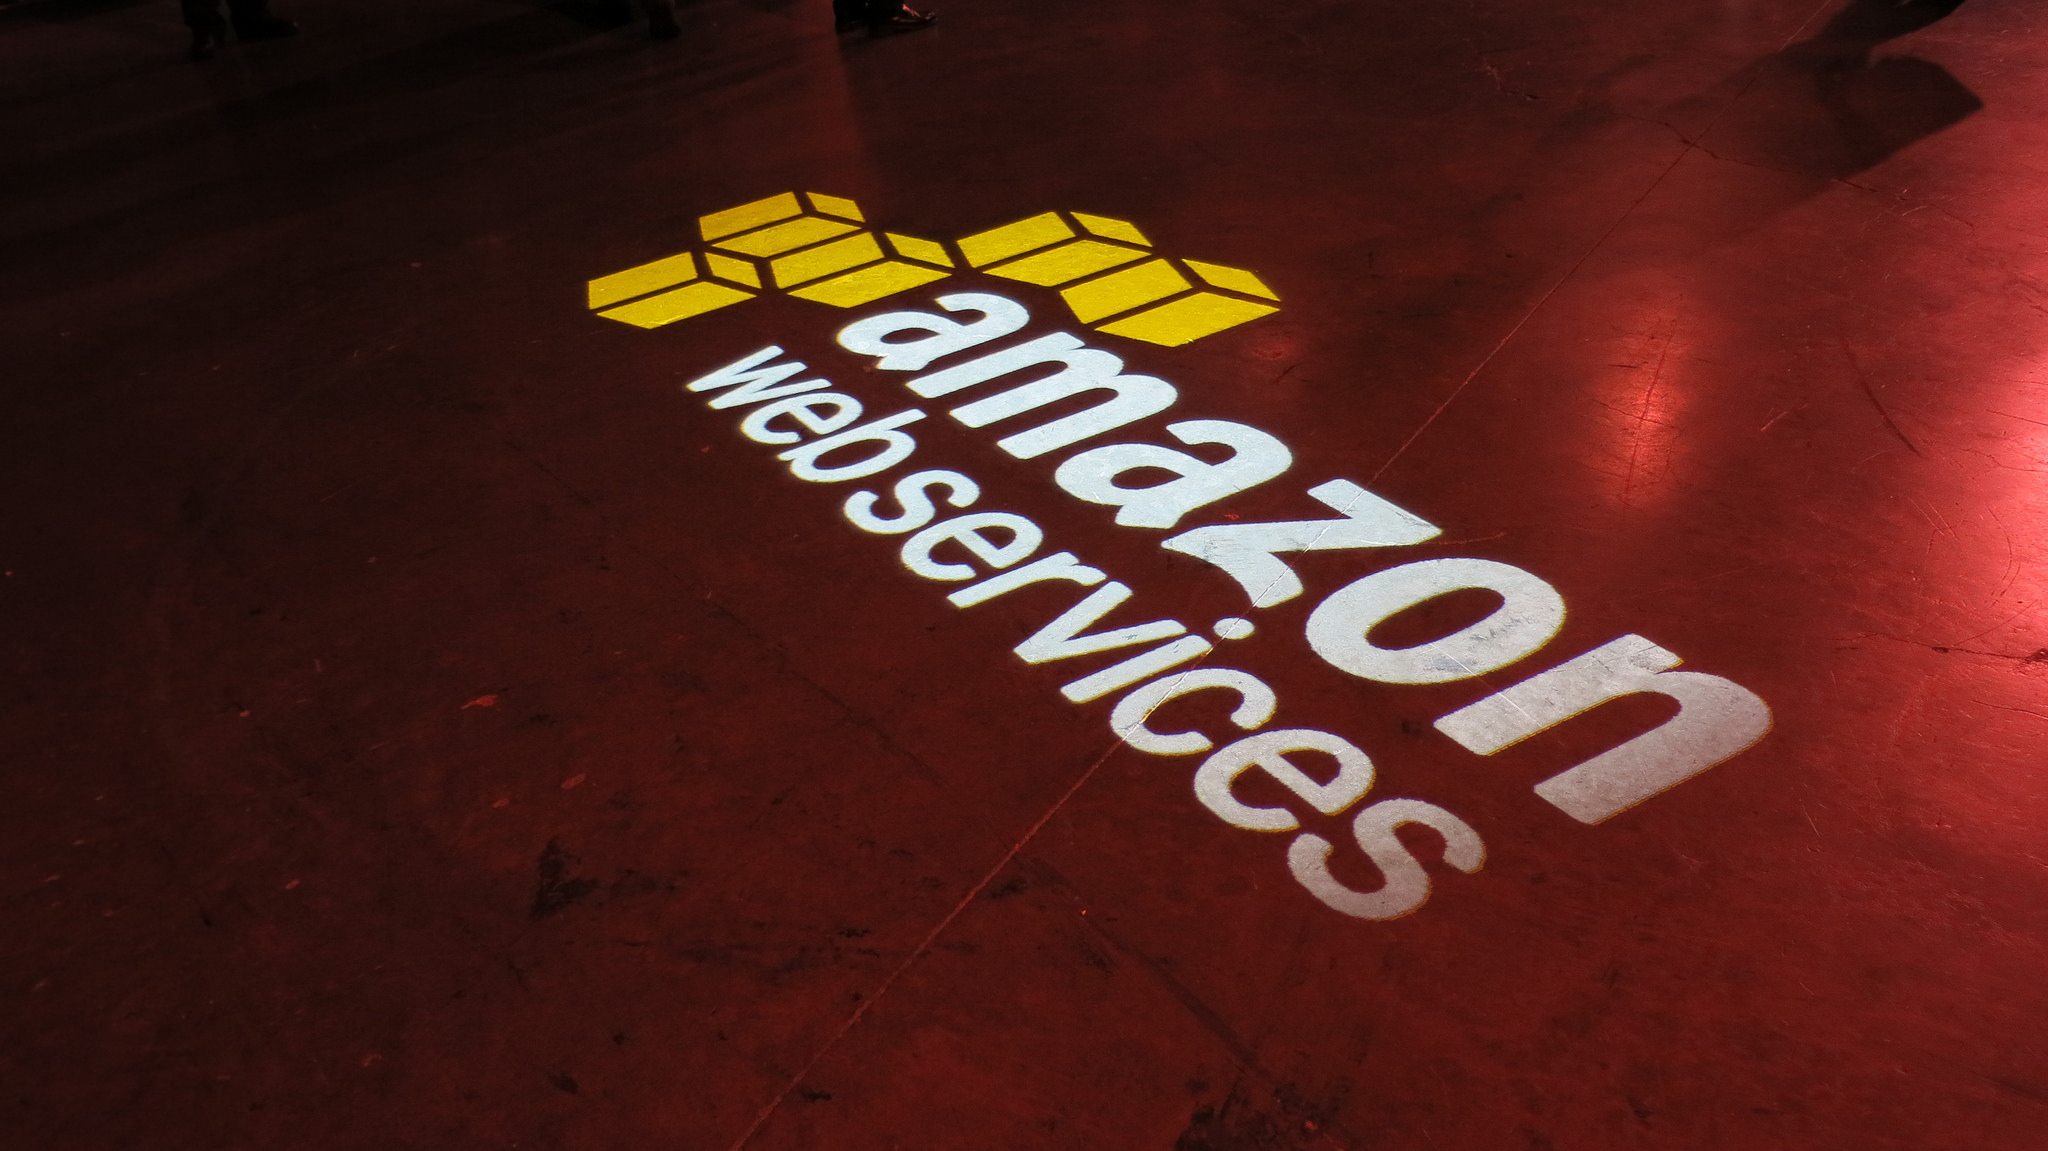 AWS announces Amazon Sumerian for building AR, VR and 3D apps quickly